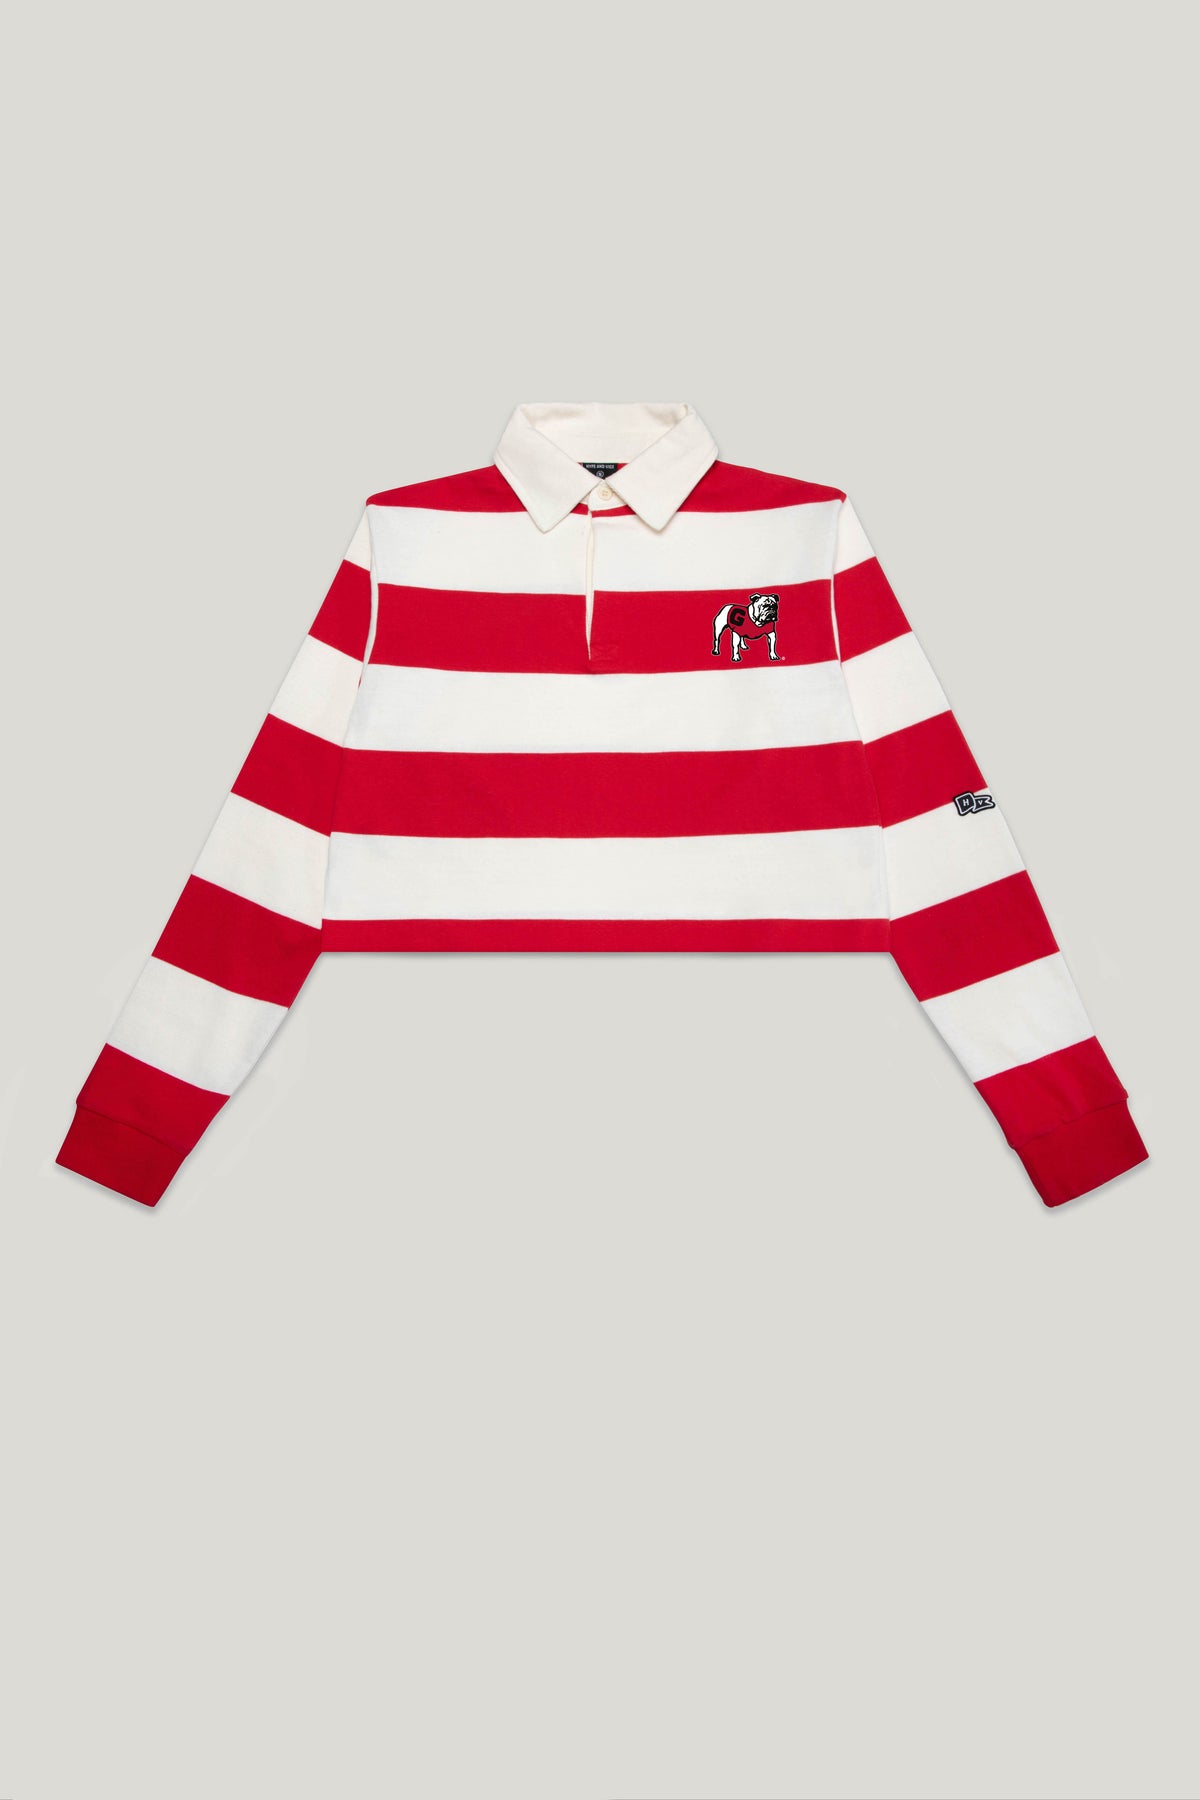 University of Georgia Rugby Top